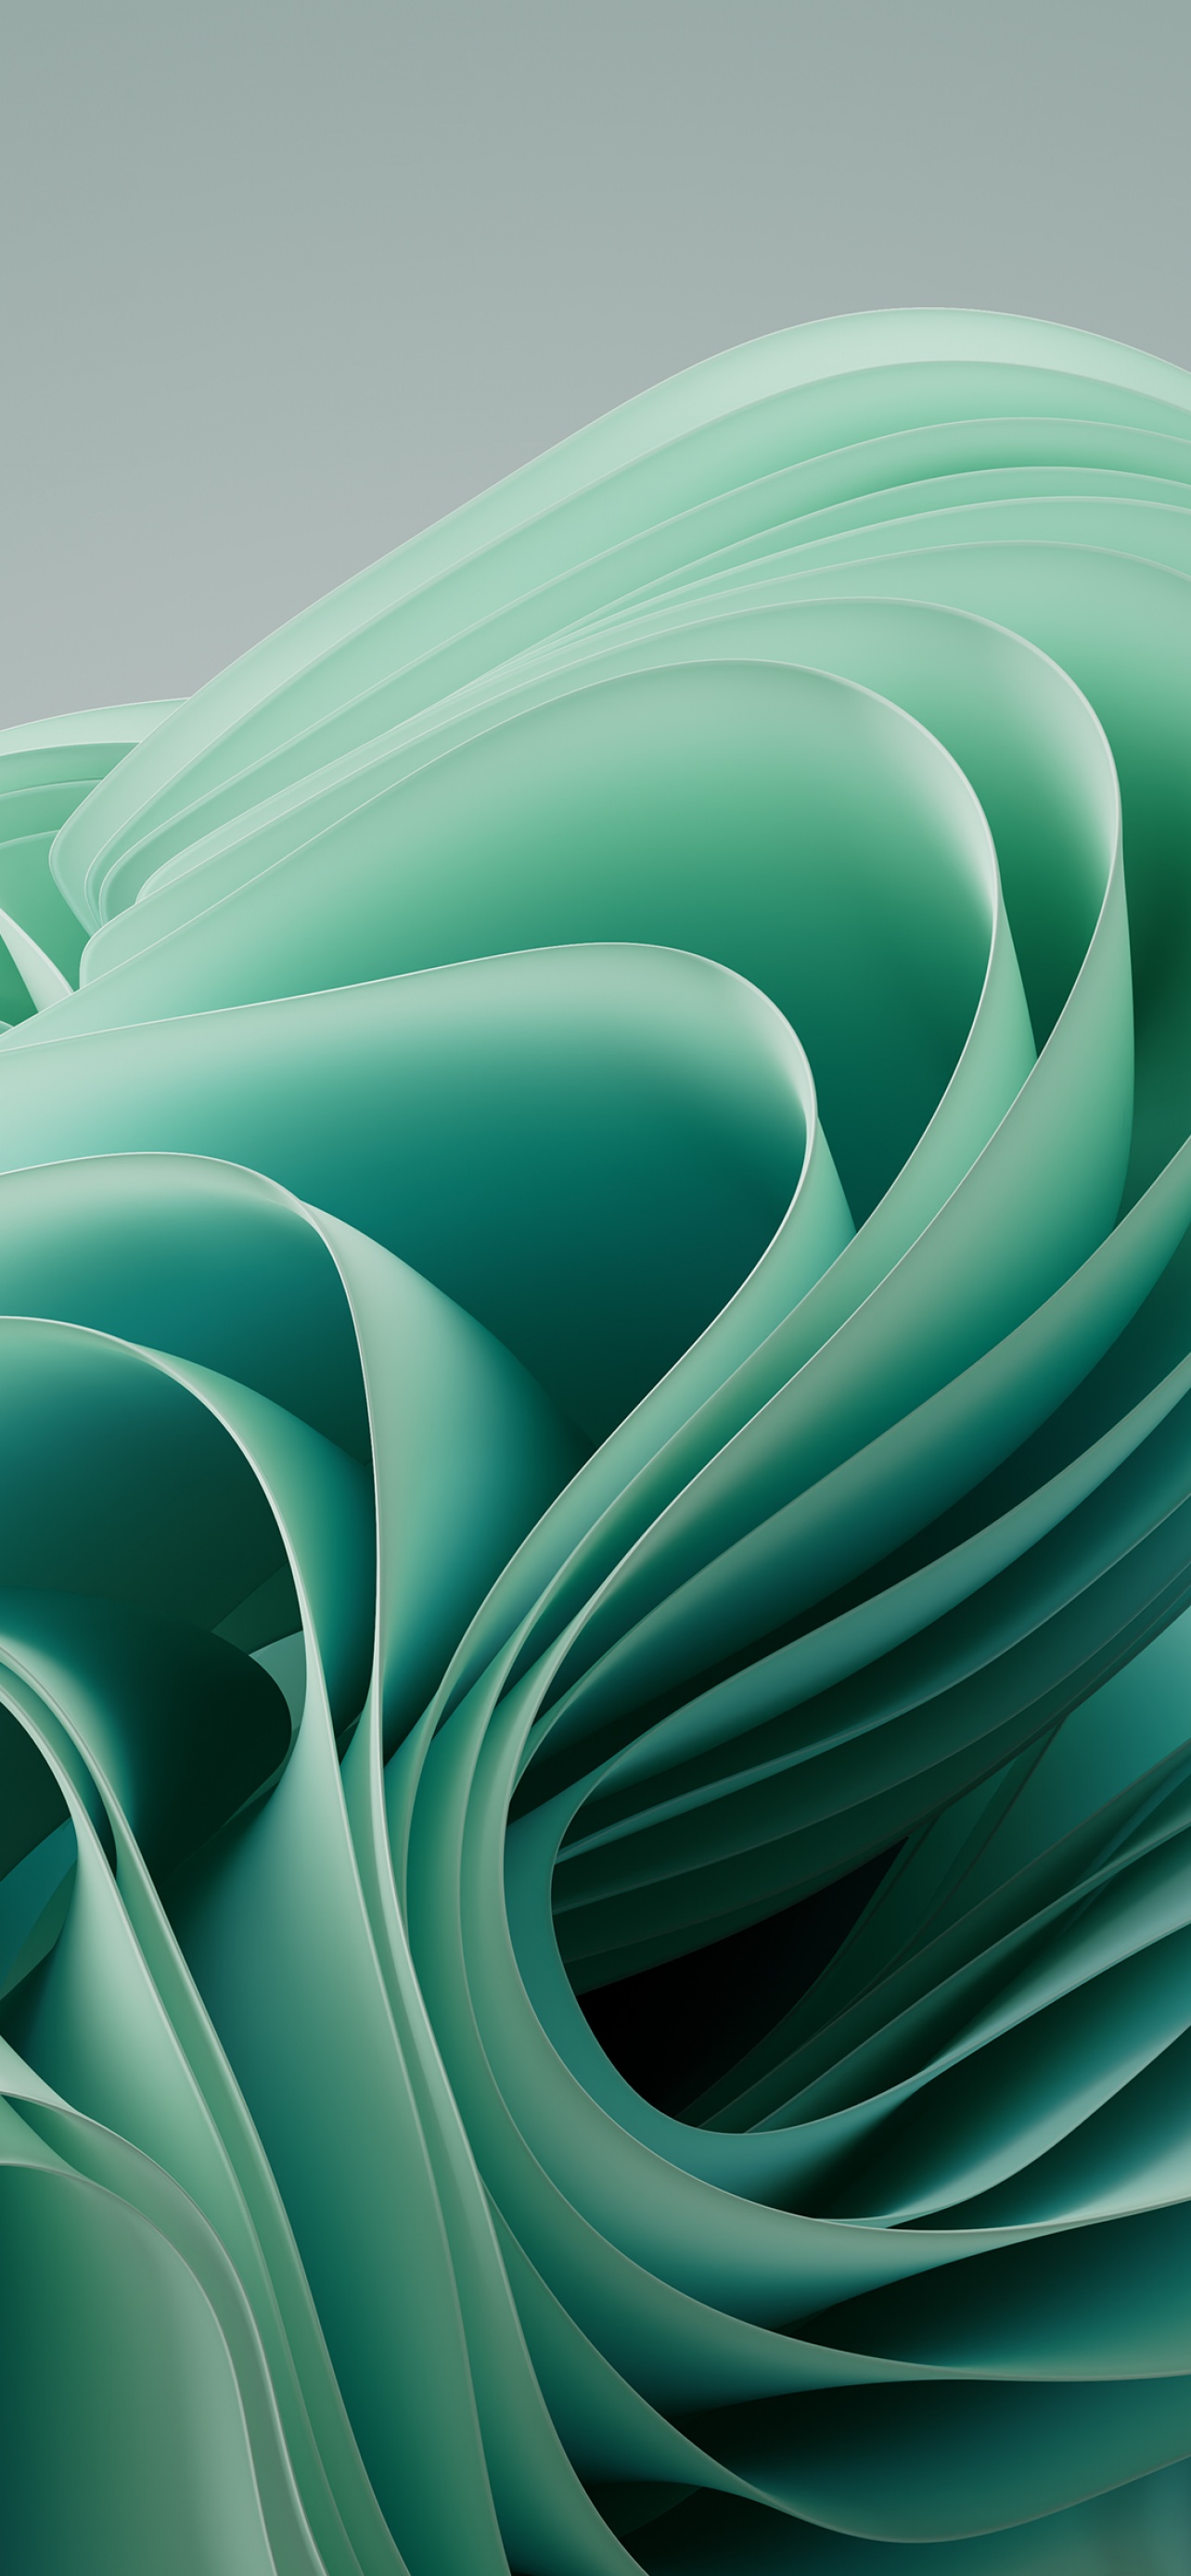 Surface Laptop 5 Wallpaper 4K, Stock, Teal abstract, Abstract, #9053